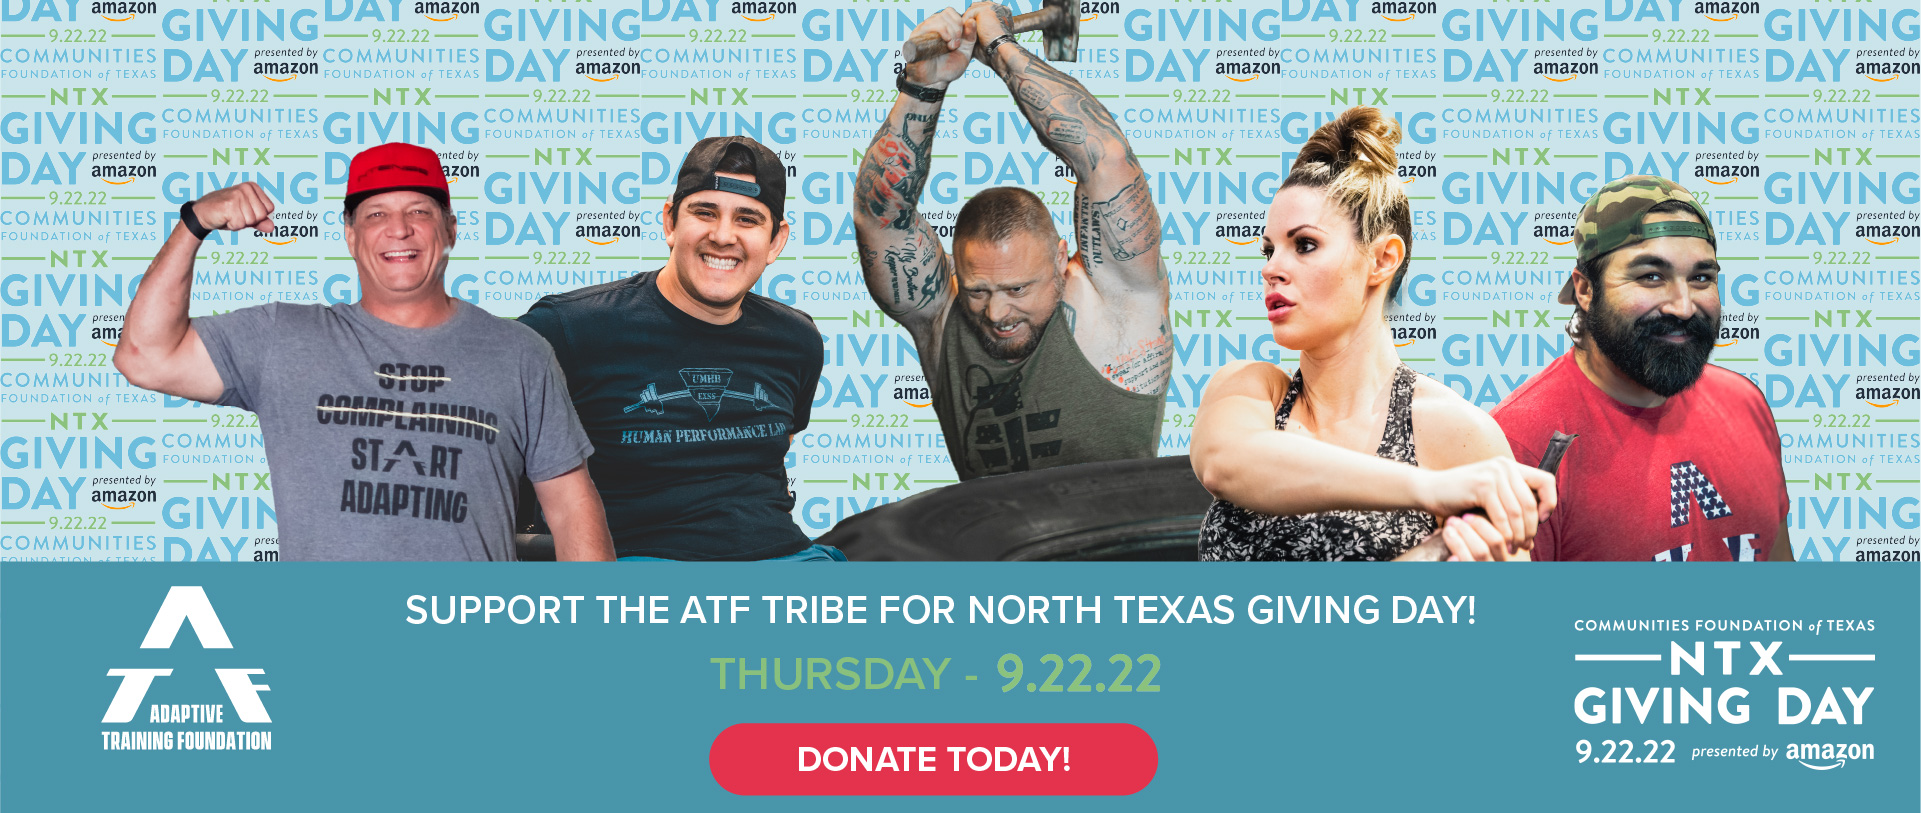 Support the ATF Tribe for North Texas Giving Day!